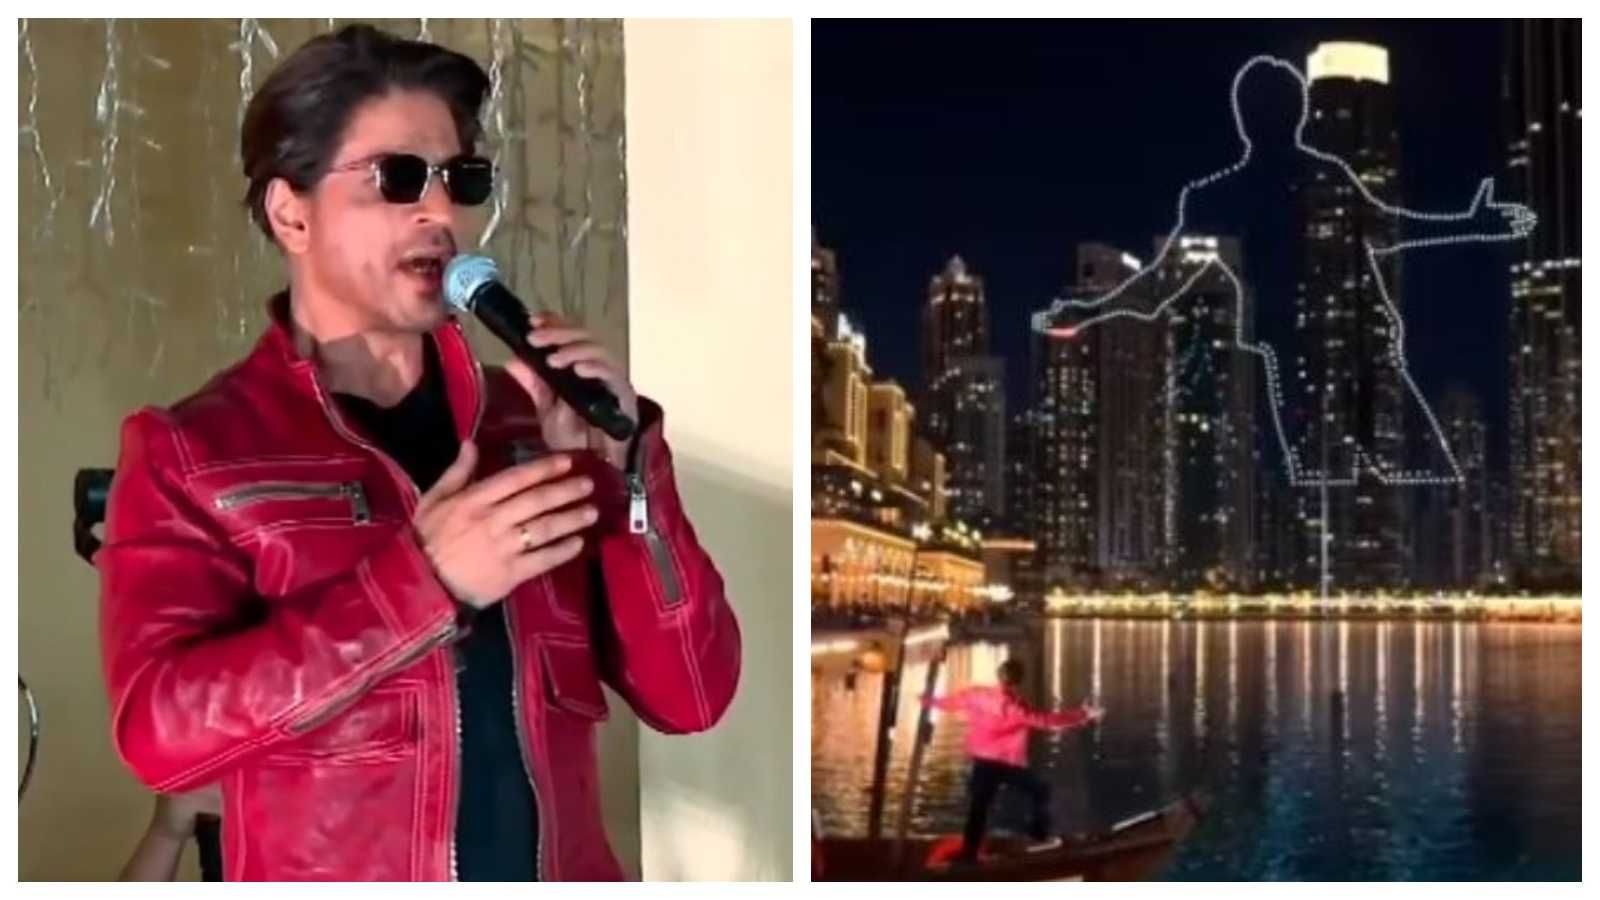 Shah Rukh Khan's iconic pose lights up Dubai sky ahead of Dunki release, Bollywood superstar expresses gratitude to fans